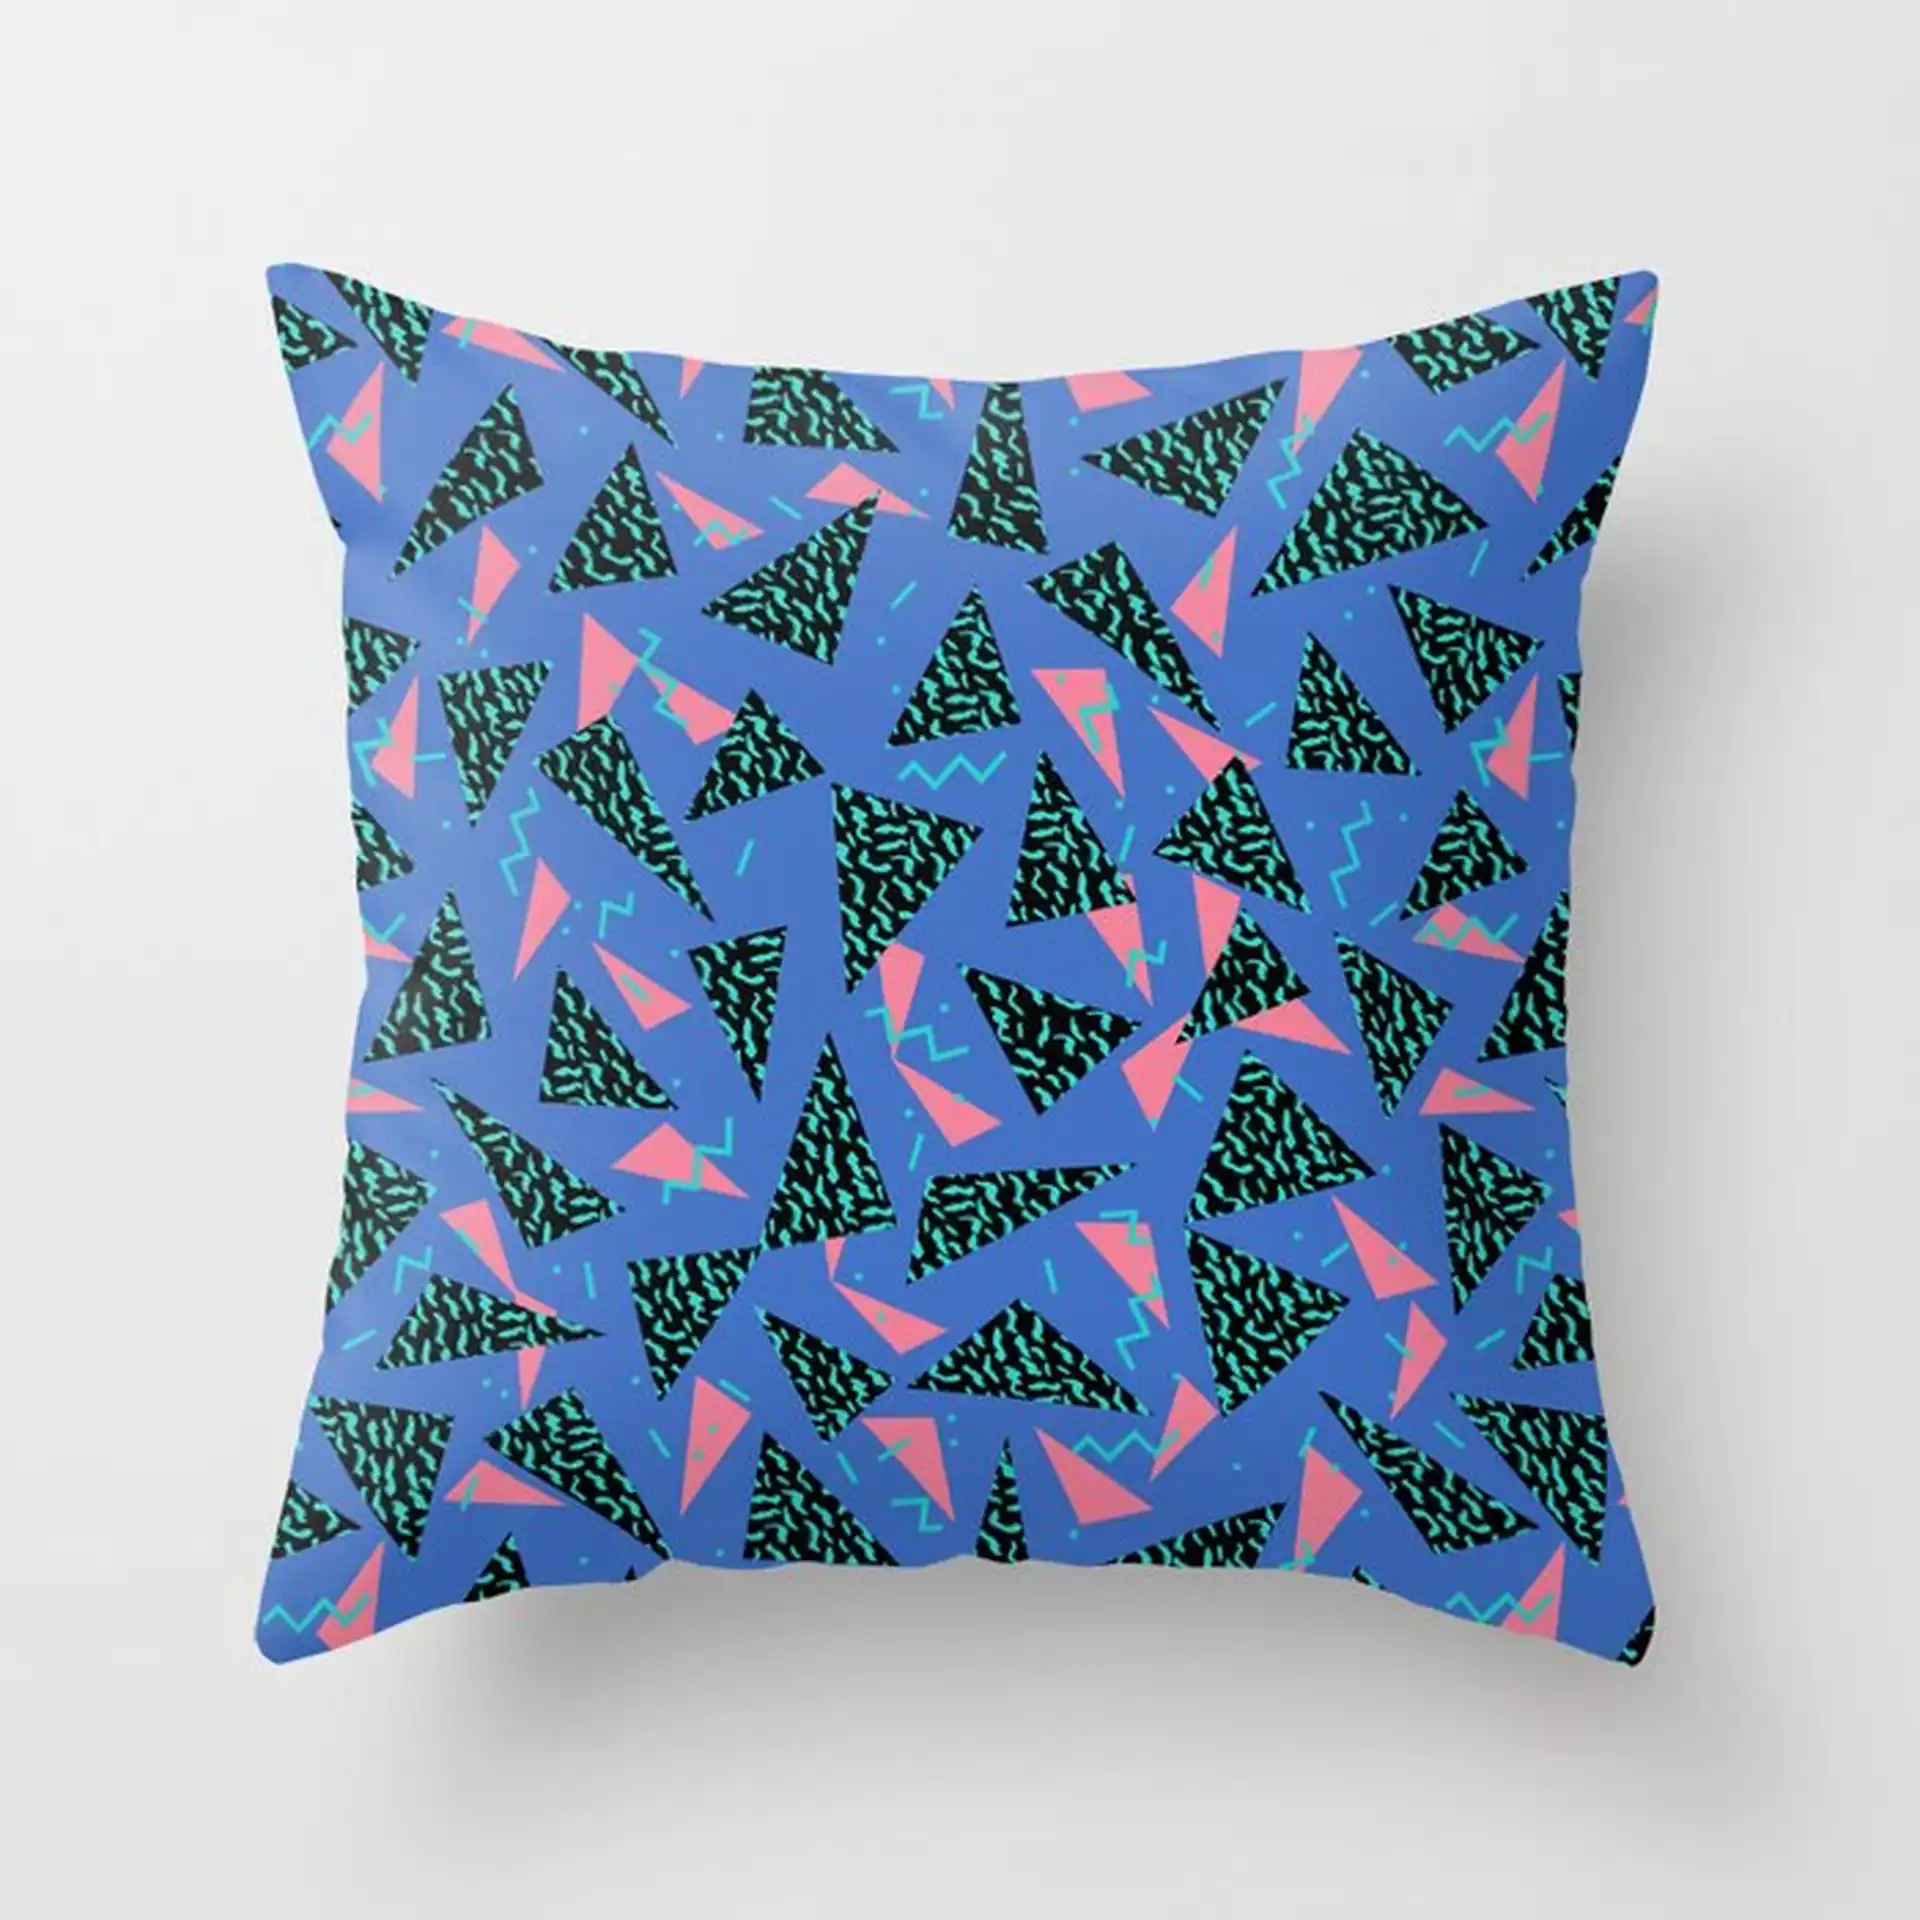 Tina - 80s Triangle Print, Bright Tri Blue Memphis Design, Memphis Triangle Couch Throw Pillow by Charlottewinter - Cover (18" x 18") with pillow insert - Outdoor Pillow